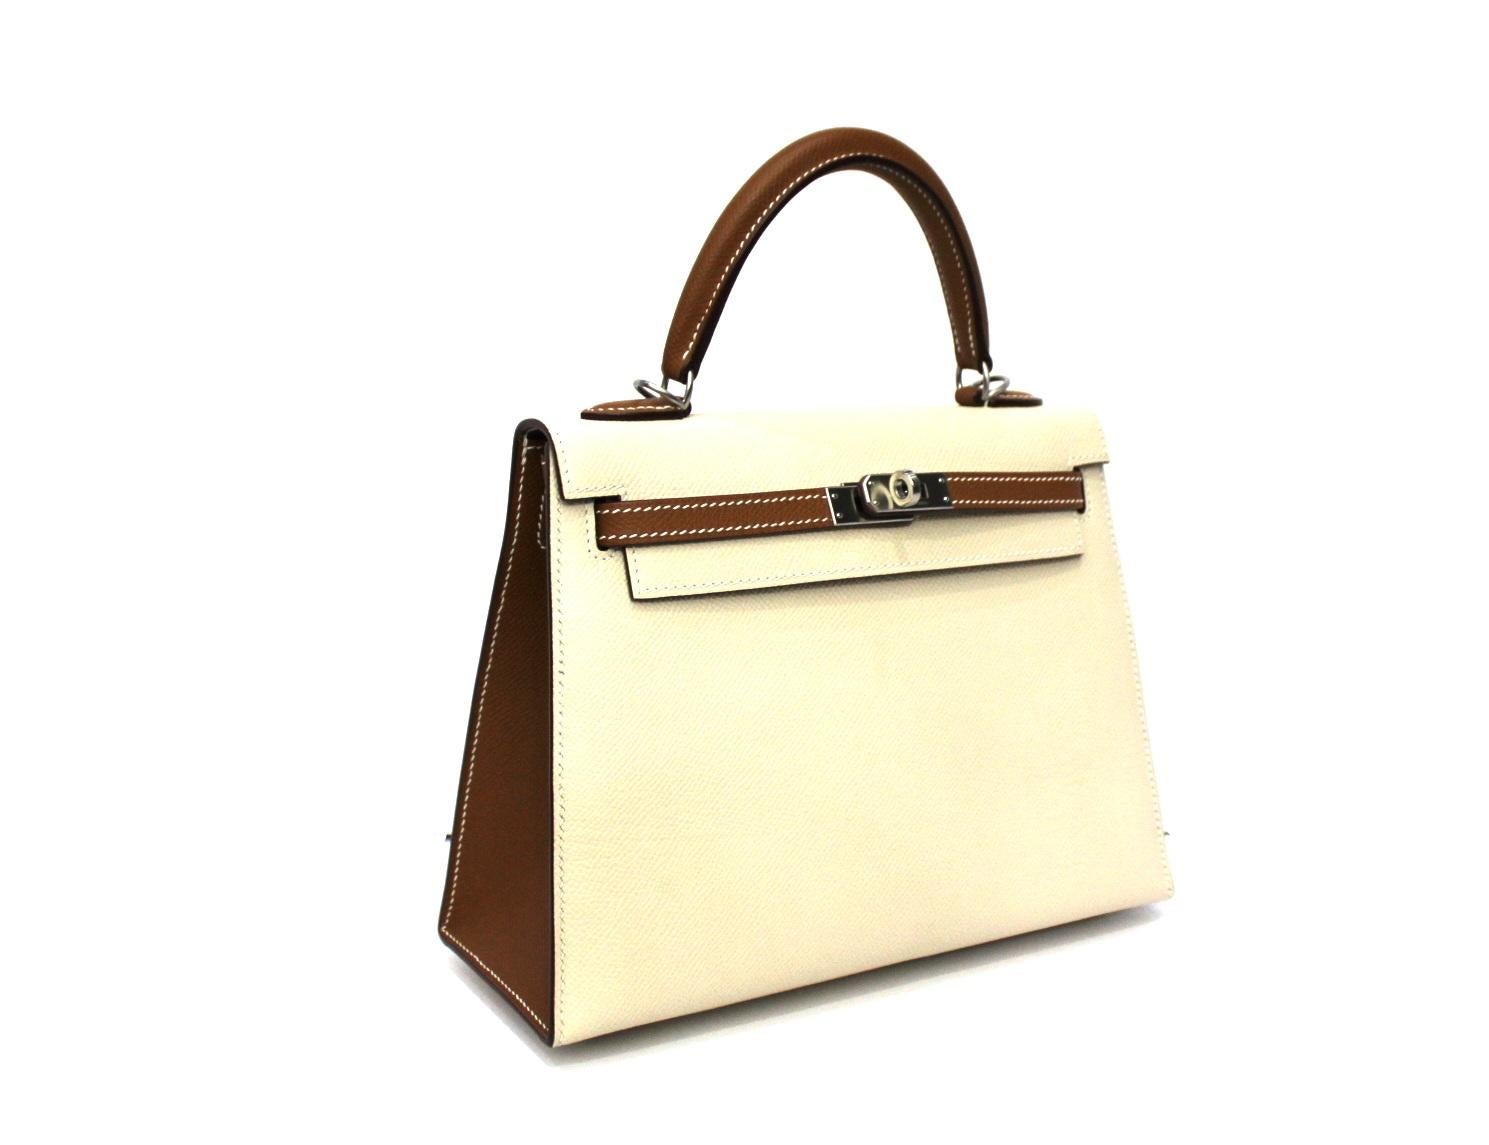 Superb Hermès bag model Kelly 25 cm made of beige and camel leather with silver hardware. Equipped with top handle and removable shoulder strap. Closing with classic Hermès hook, internally quite large. Equipped with its dust-bag and its original